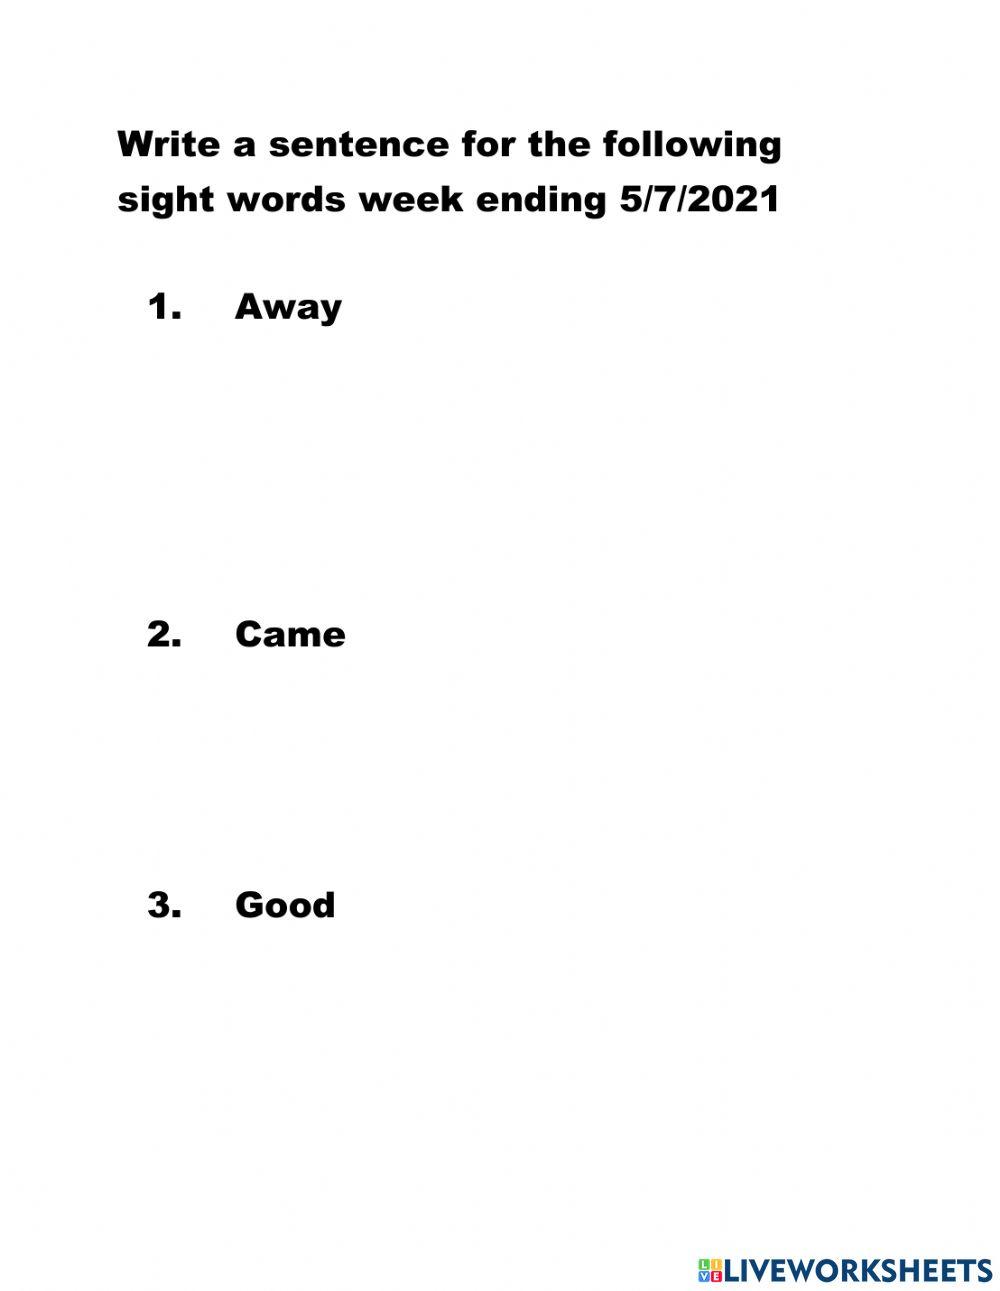 Write a sentence for the following sight words week ending 5-7-2021